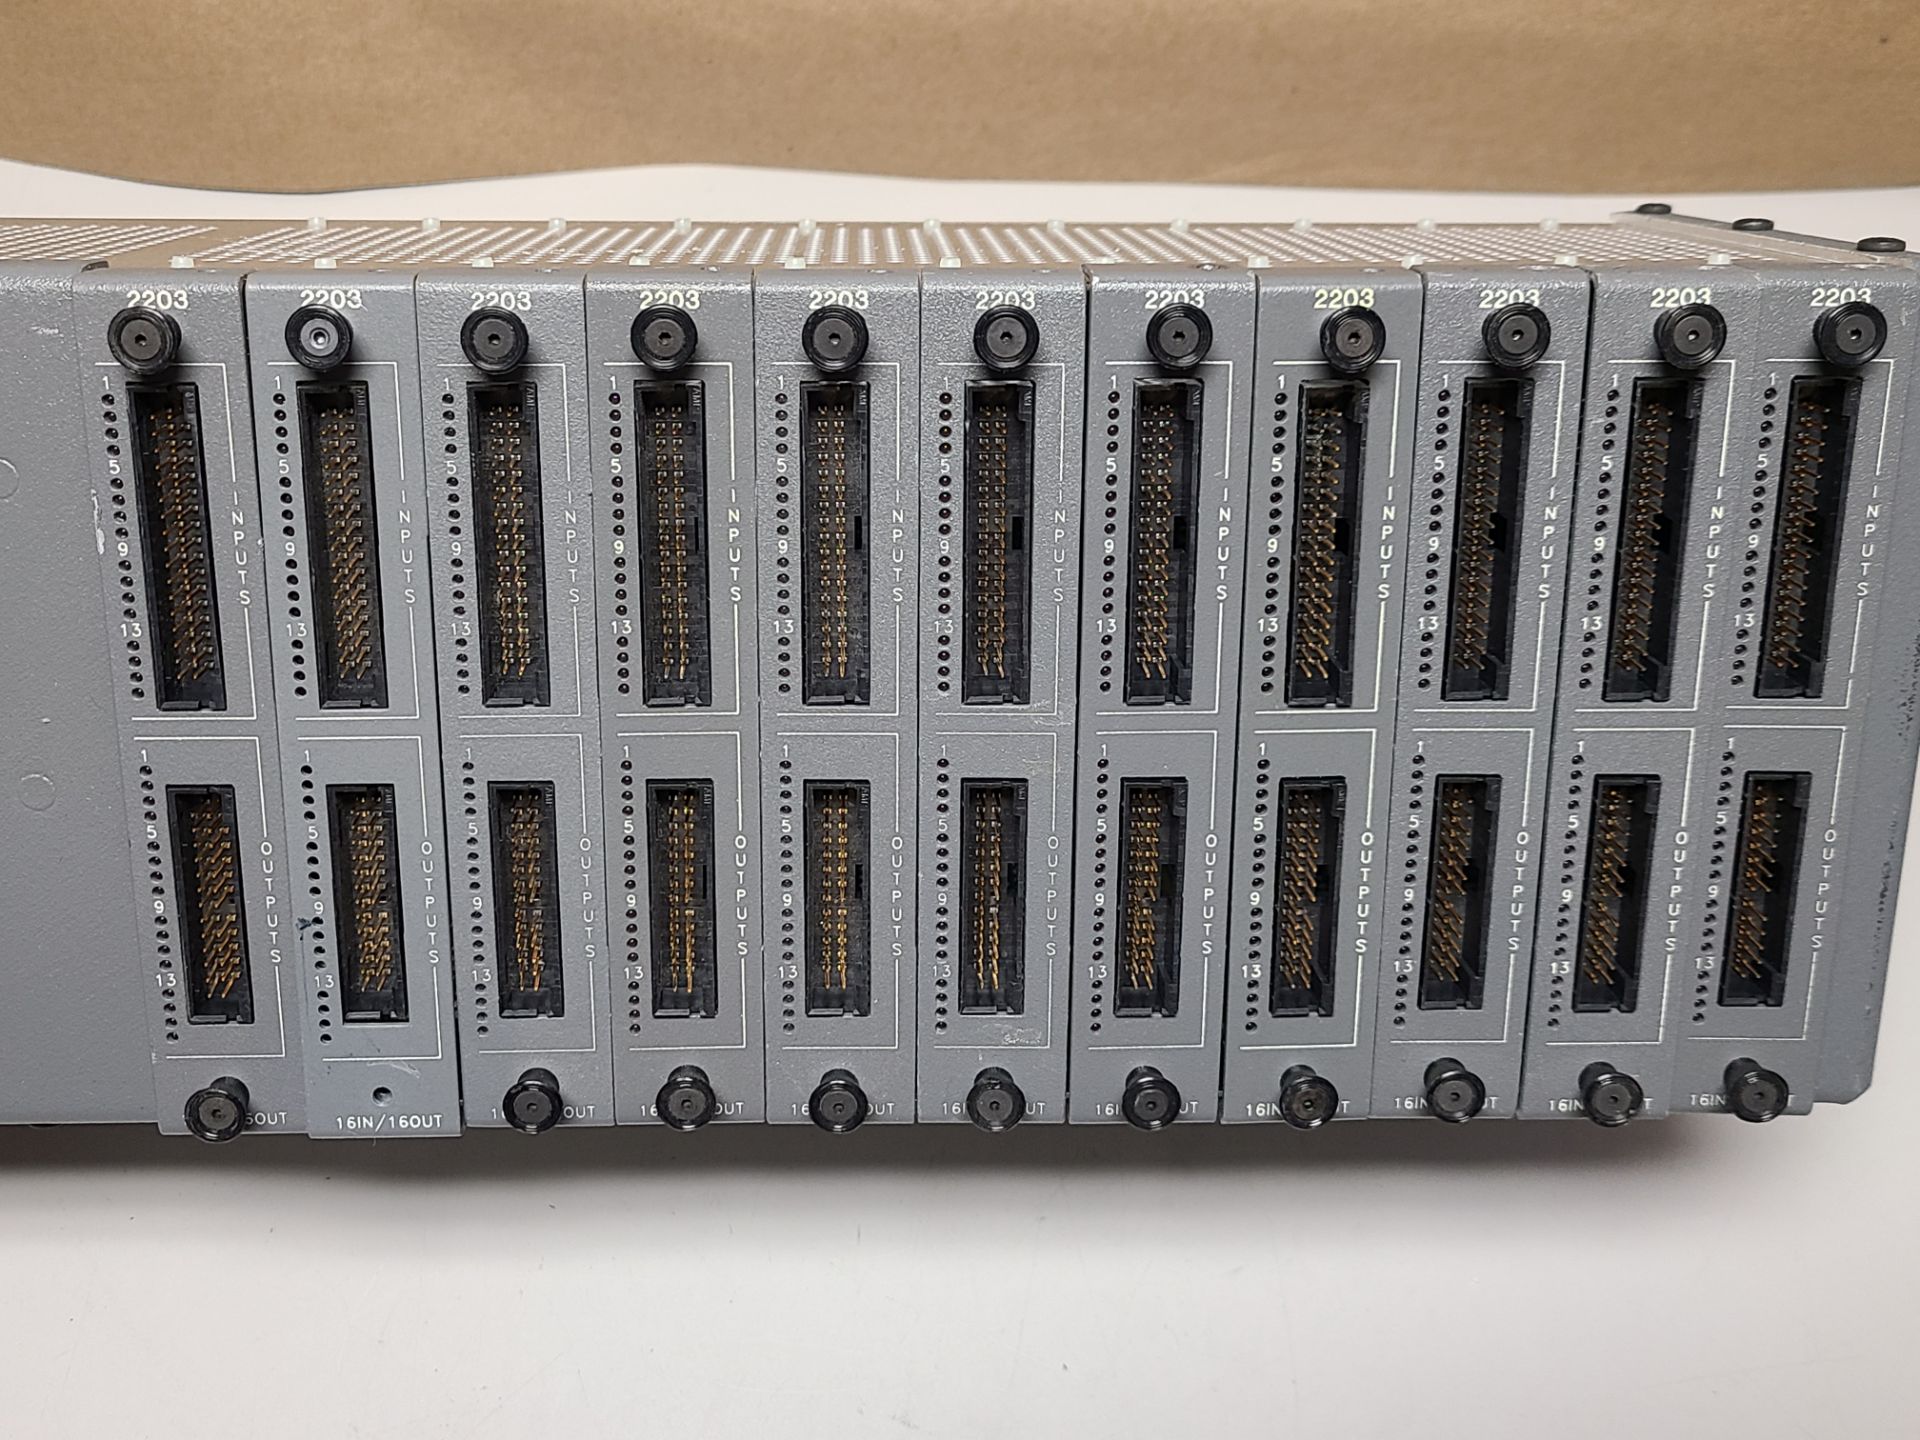 CONTROL TECHNOLOGY PLC RACK WITH MODULES - Image 2 of 6